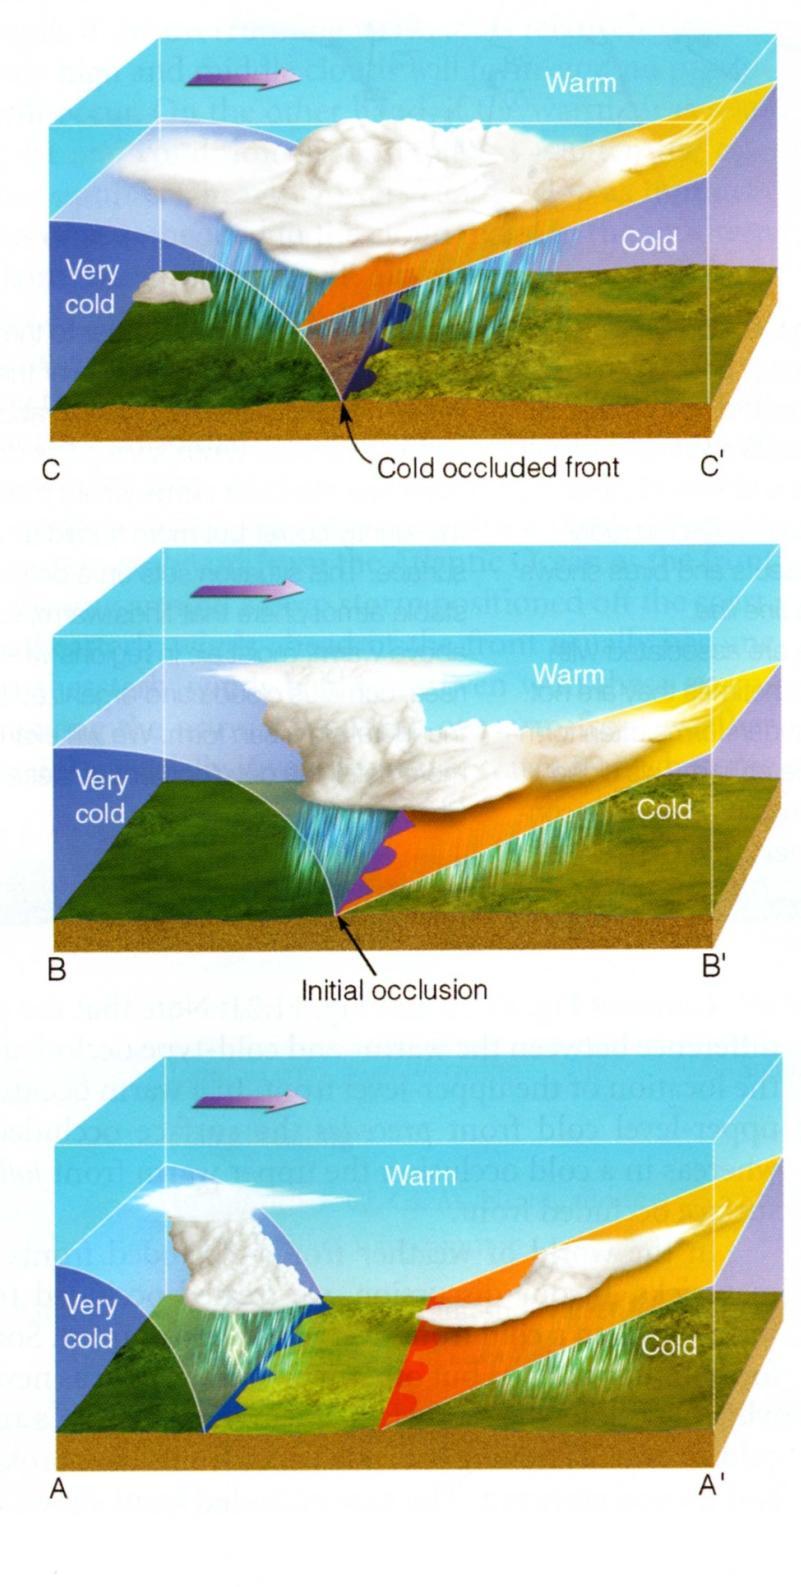 At the occlusion, precipitation may range from widespread